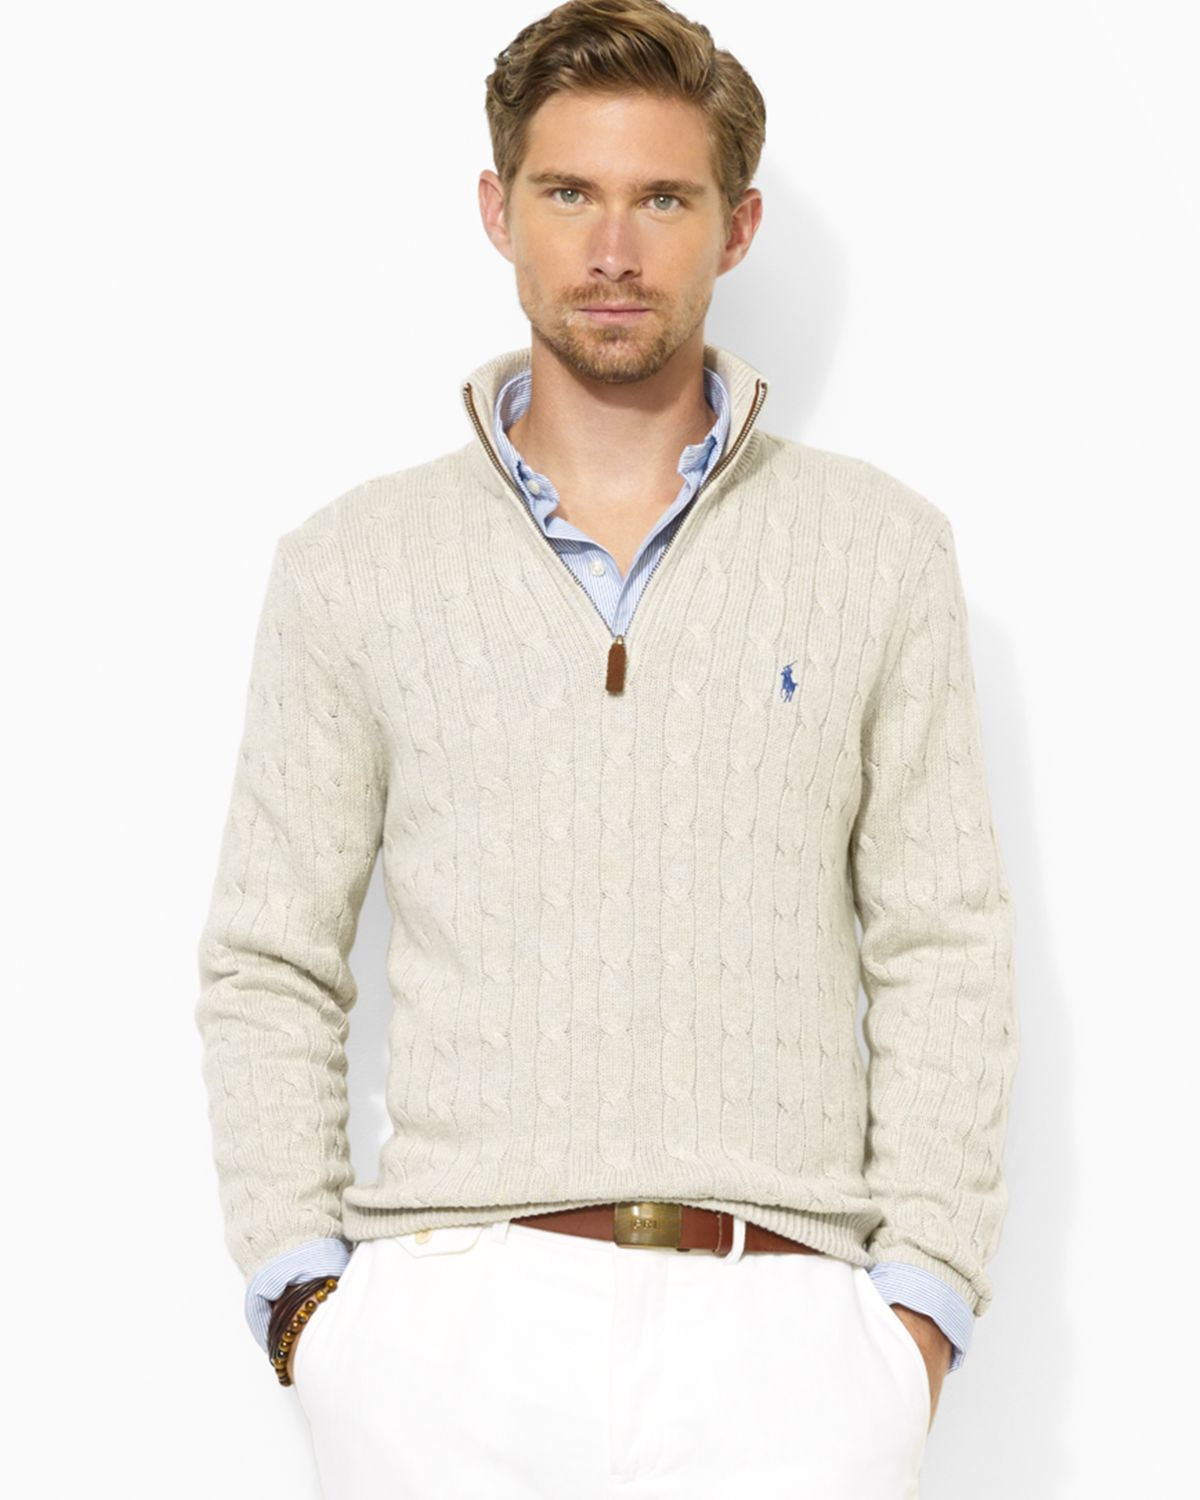 Ralph Lauren Polo Half Zip Cable Knit Tussah Silk Sweater in Light Grey  Heather (Gray) for Men - Lyst